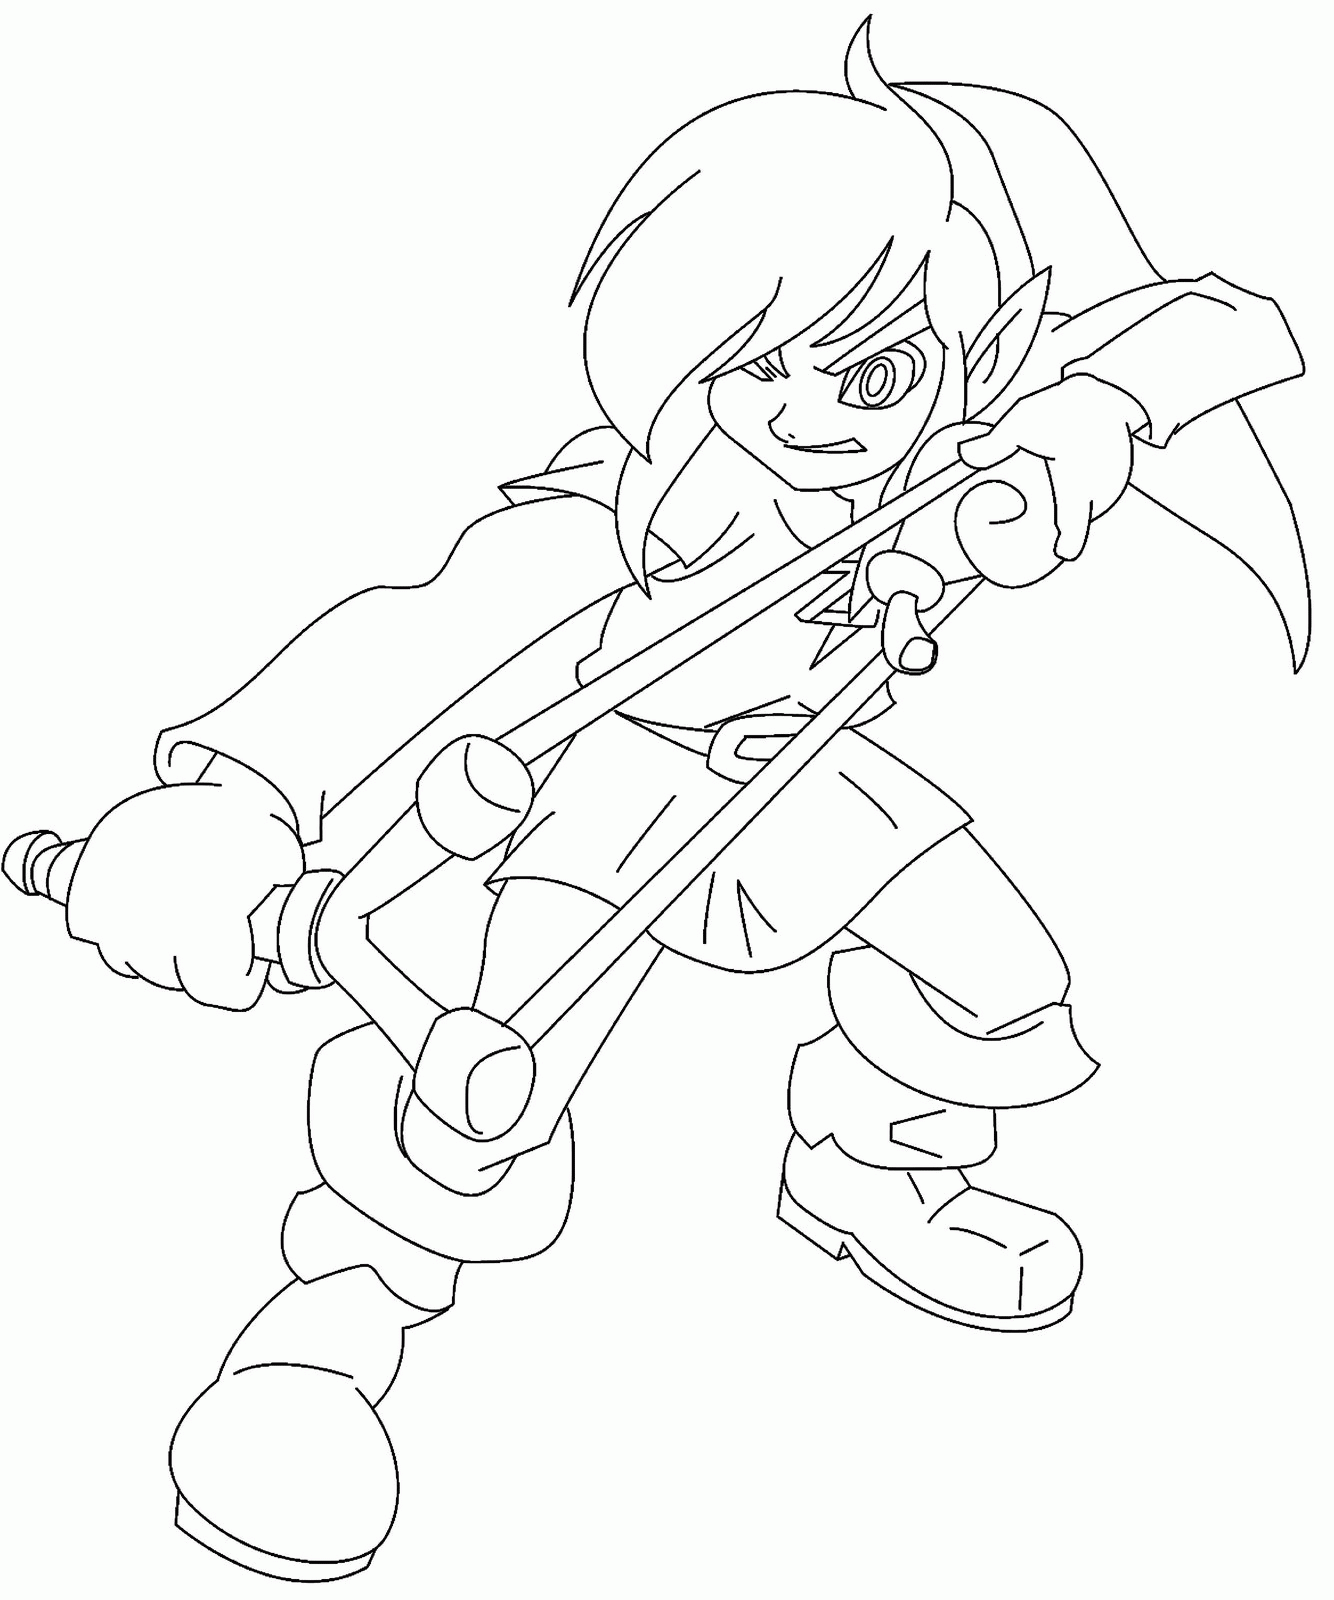 Link Zelda Coloring Pages Coloring Home